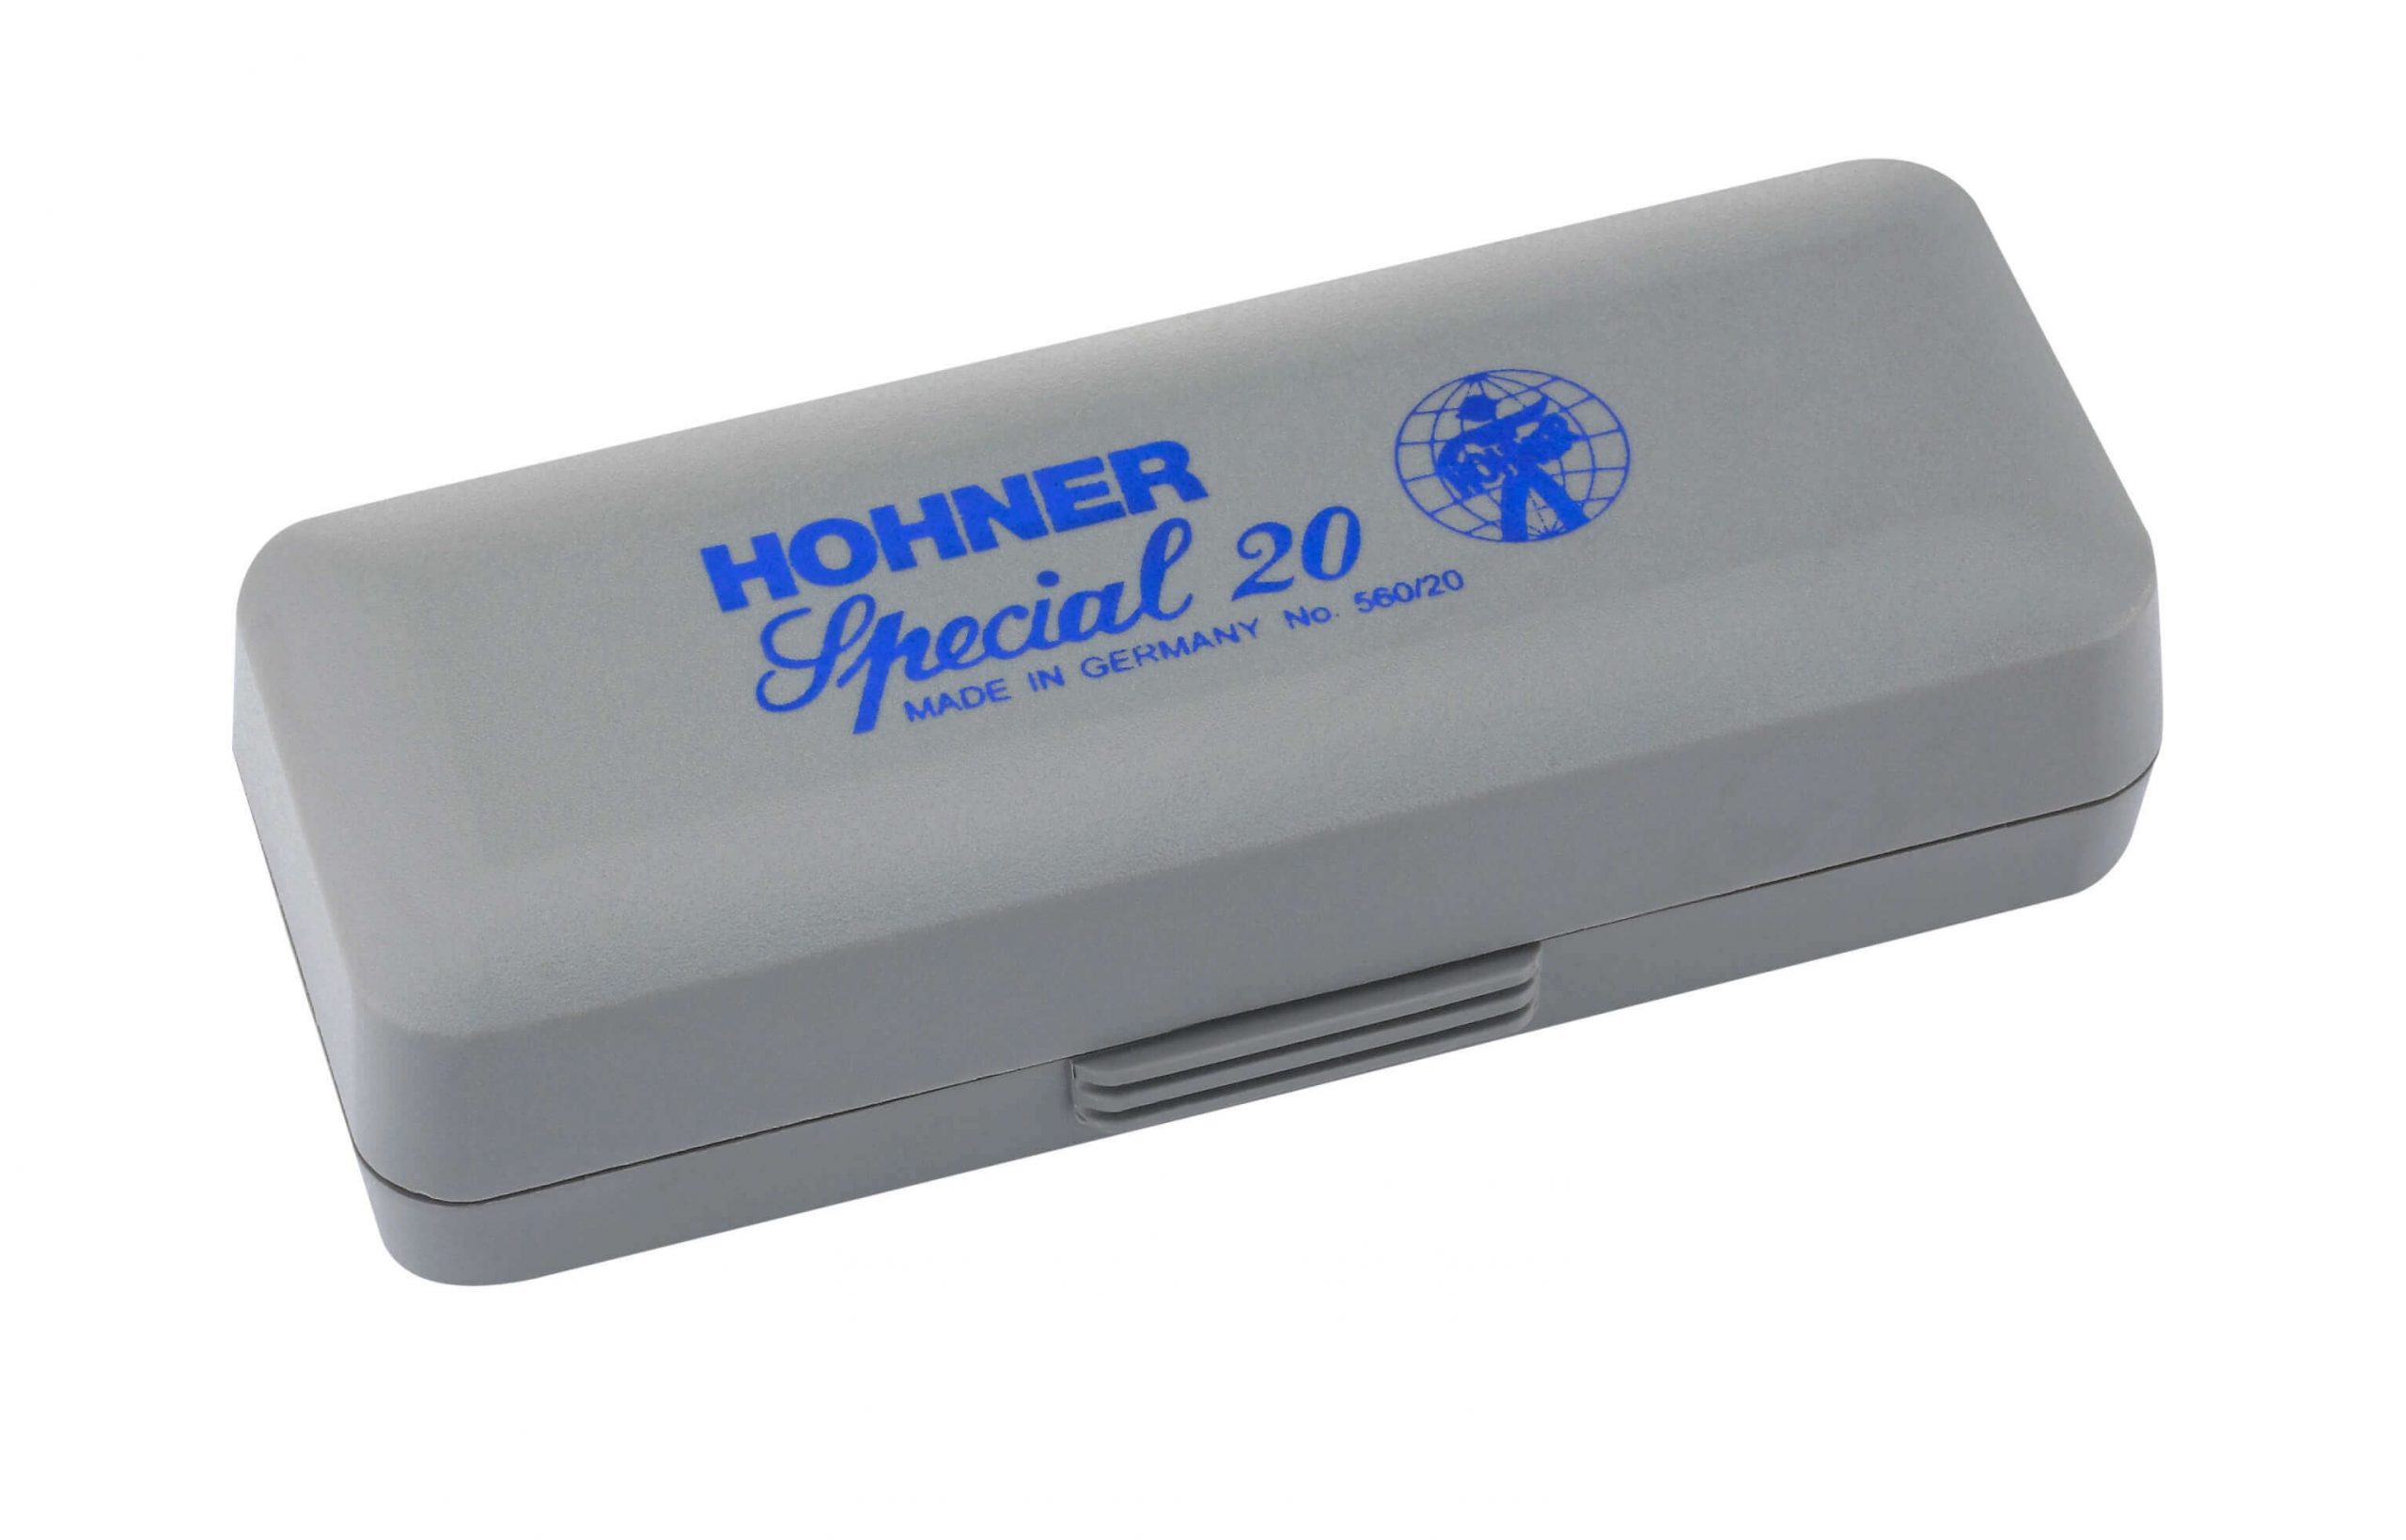 Hohner Special 20 Diatonic Harmonica 10 Hole Mouth Organ ABS Comb